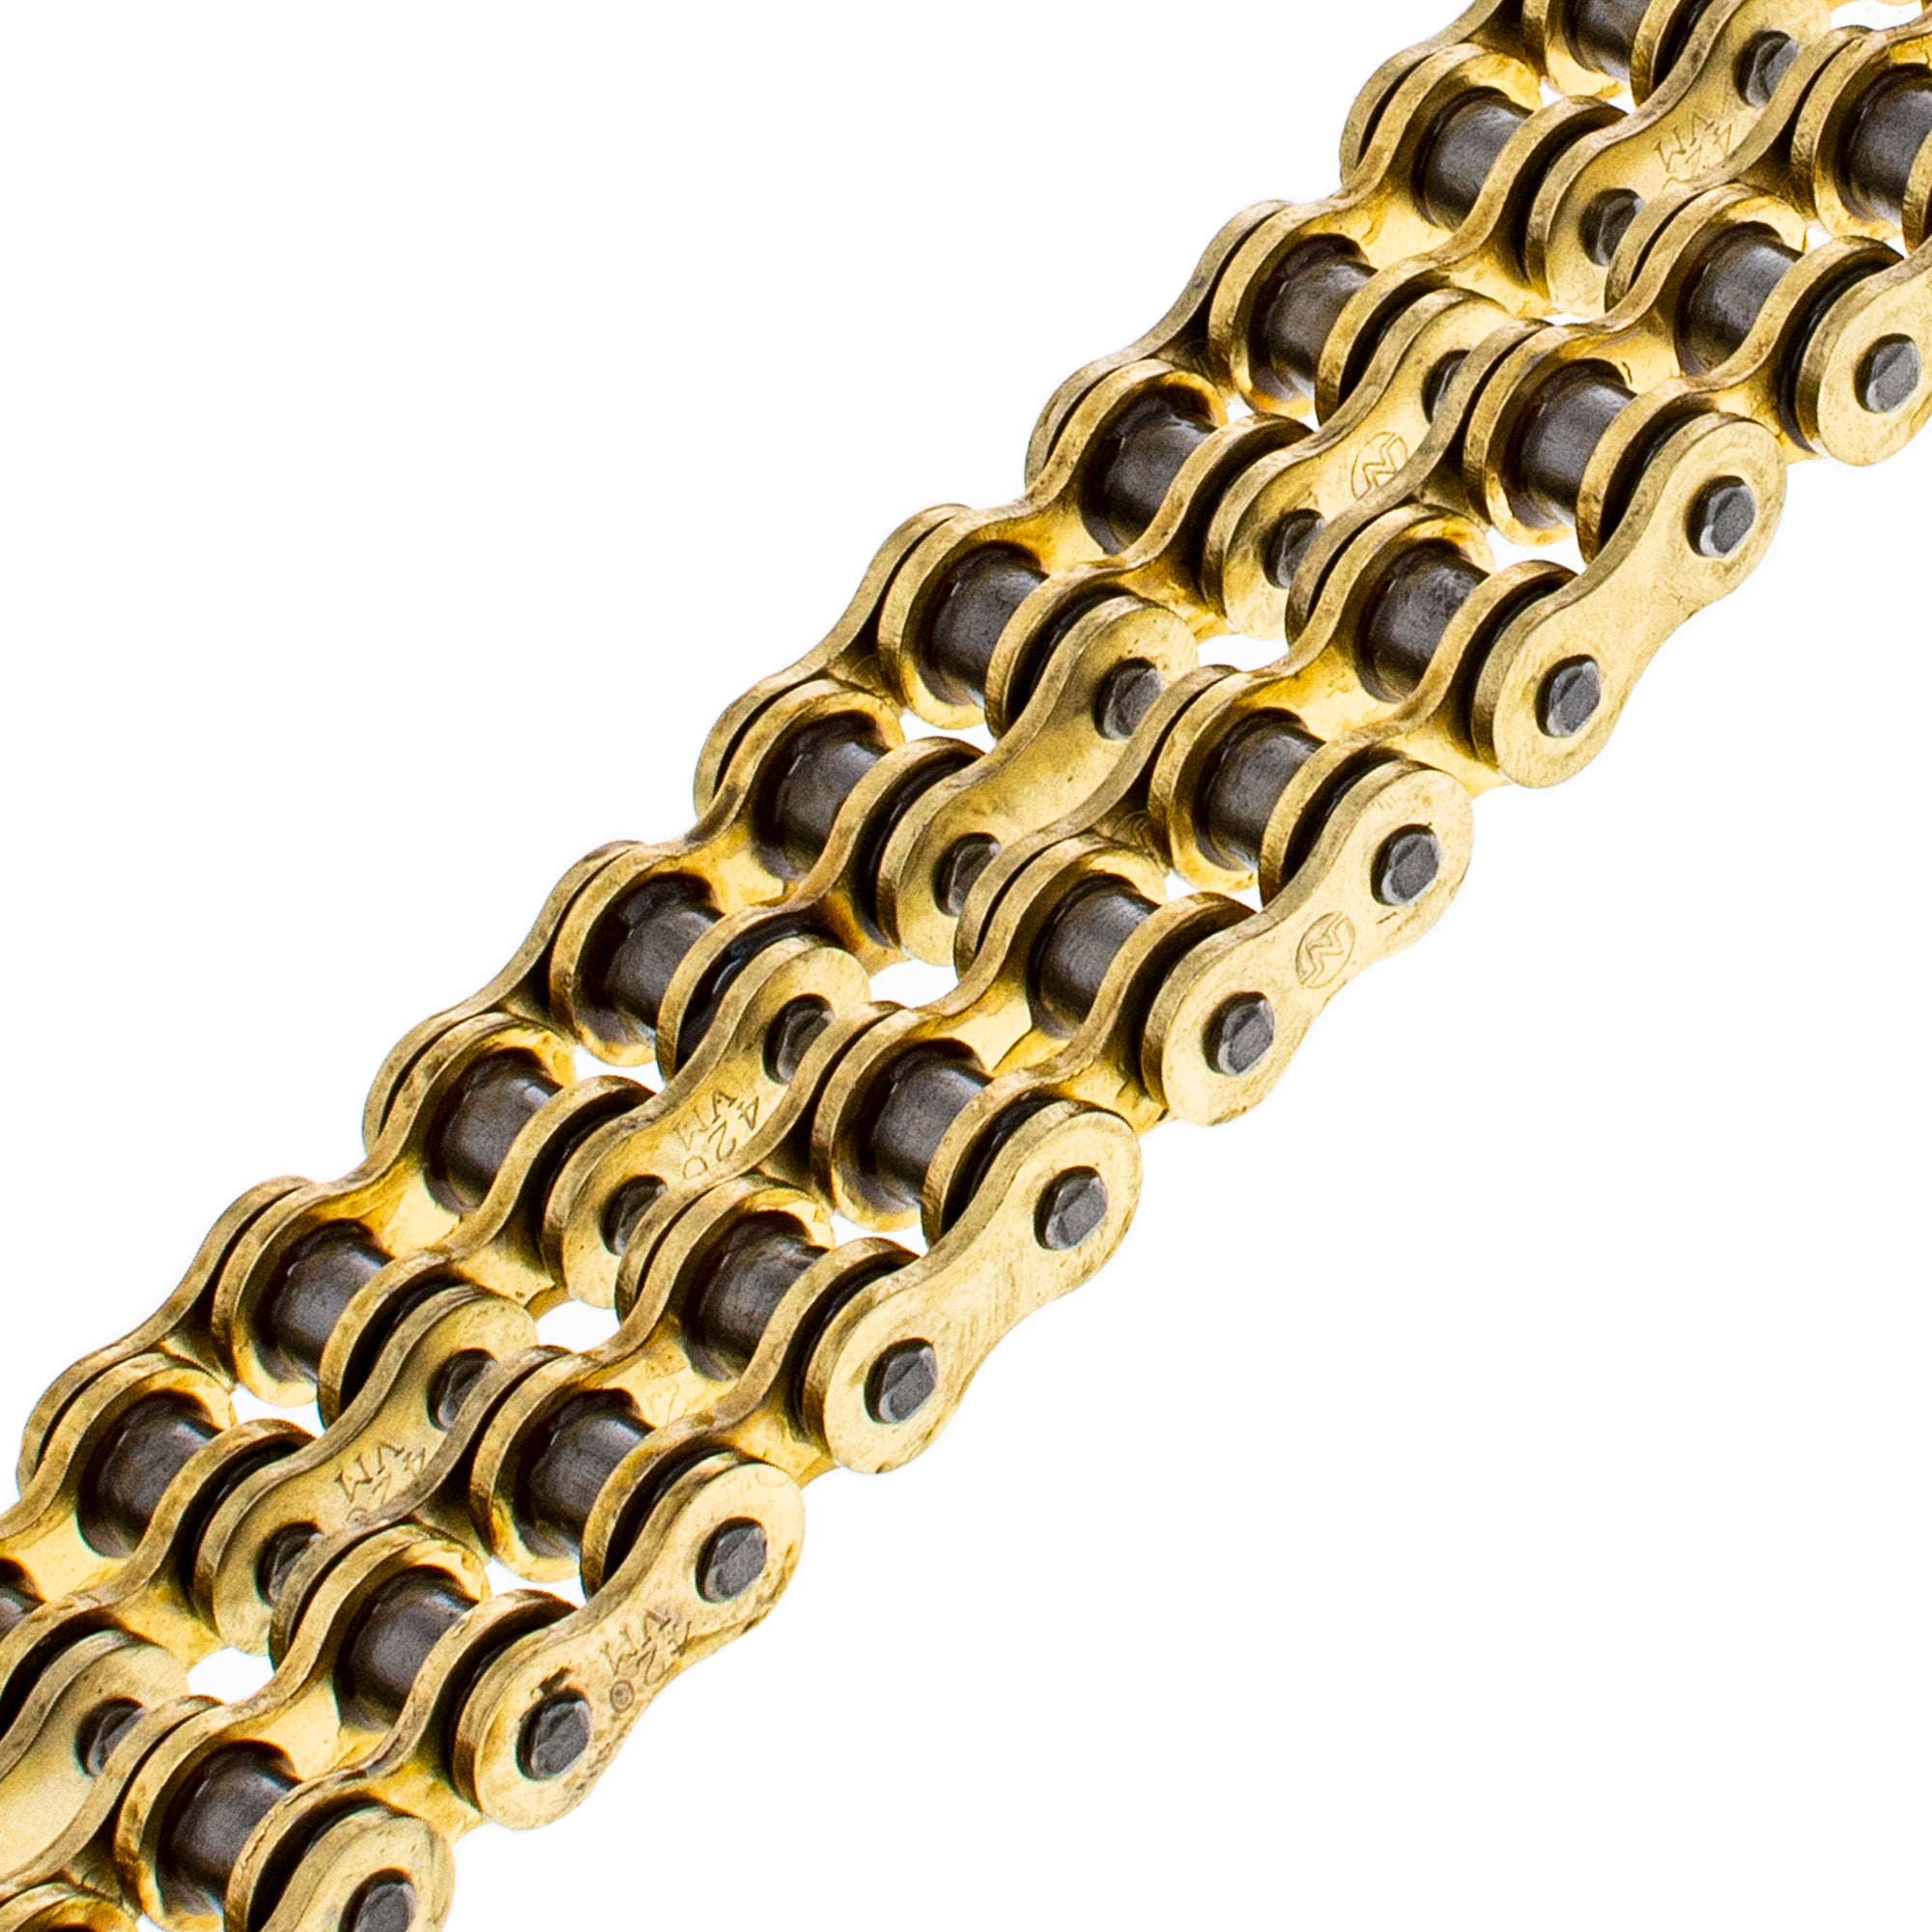 Gold X-Ring Chain 122 w/ Master Link for zOTHER RS50 MTX80 MTX50 DT50 5520 NICHE 519-CDC2621H